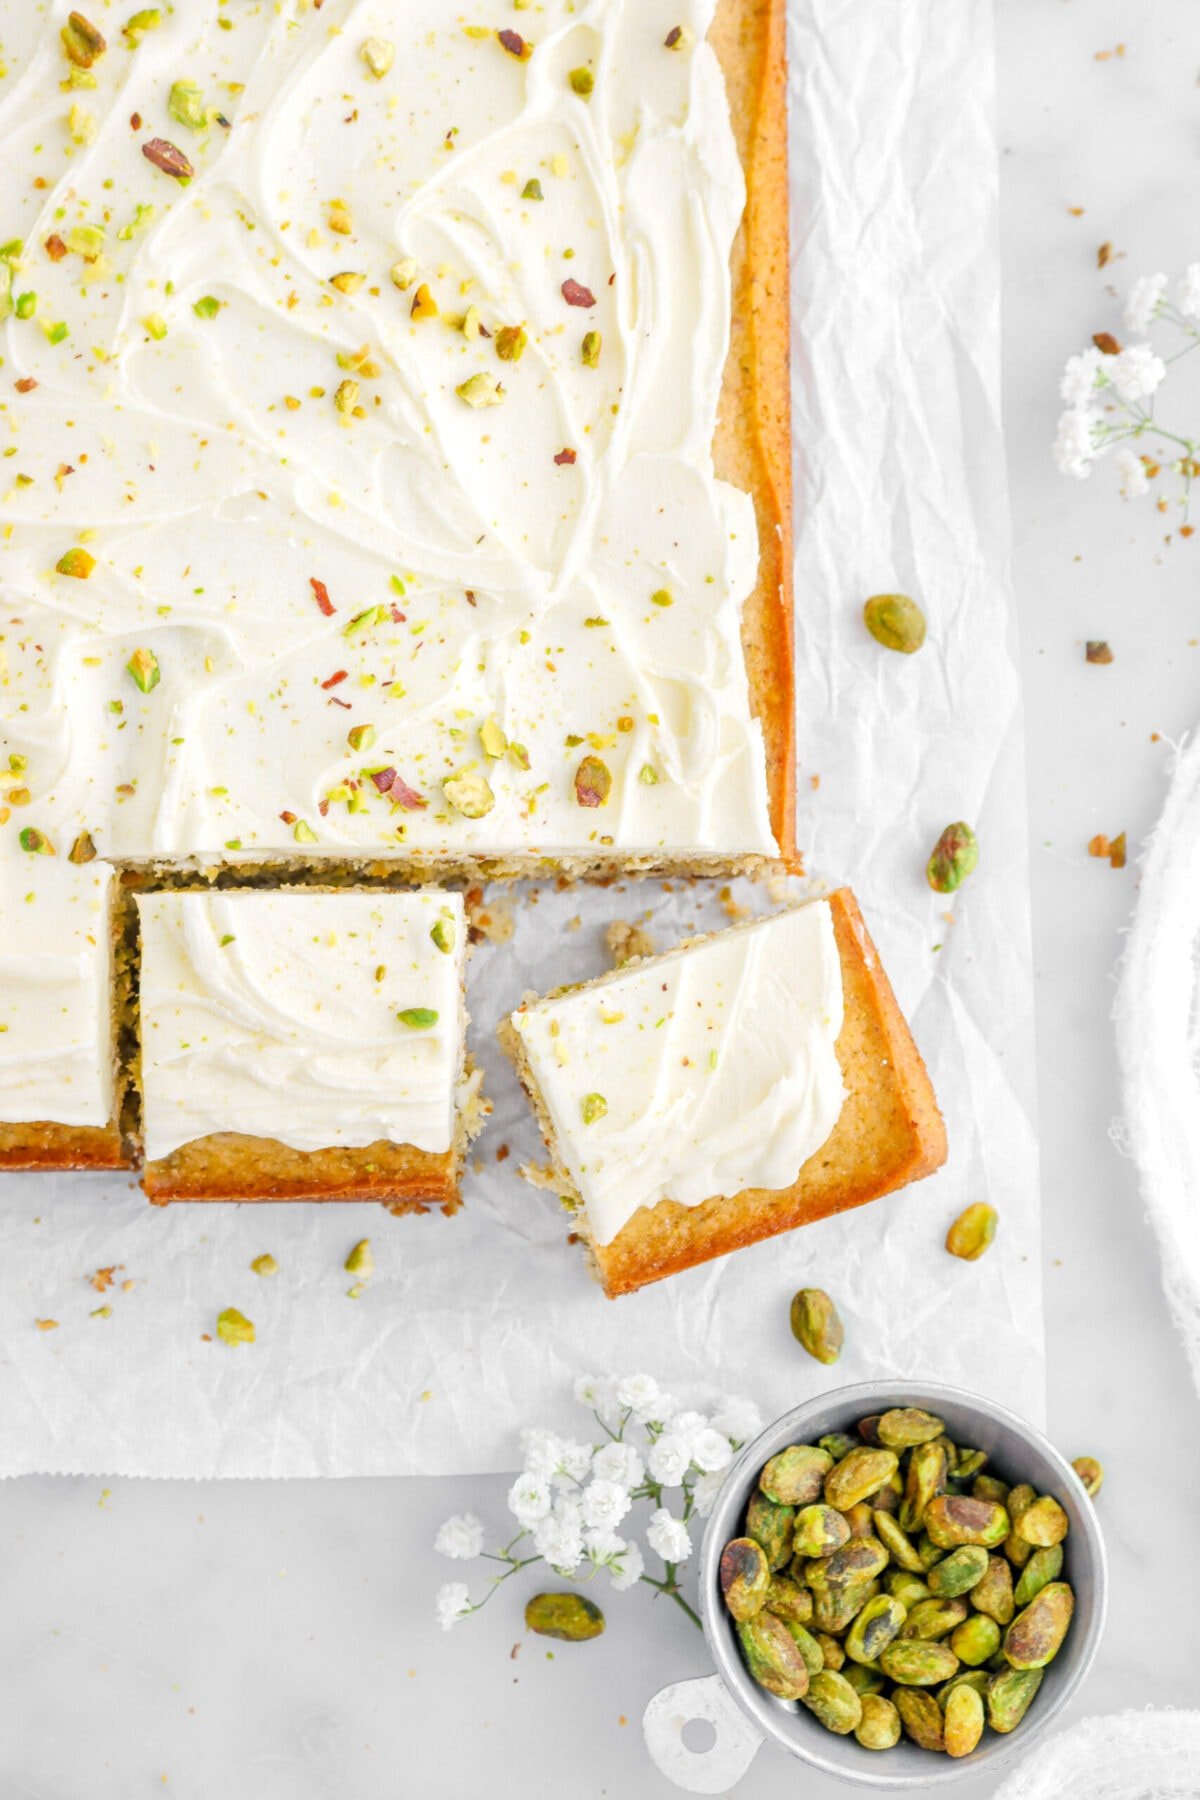 cropped overhead shot of pistachio cake with two slices cut into it and bowl of pistachios beside.